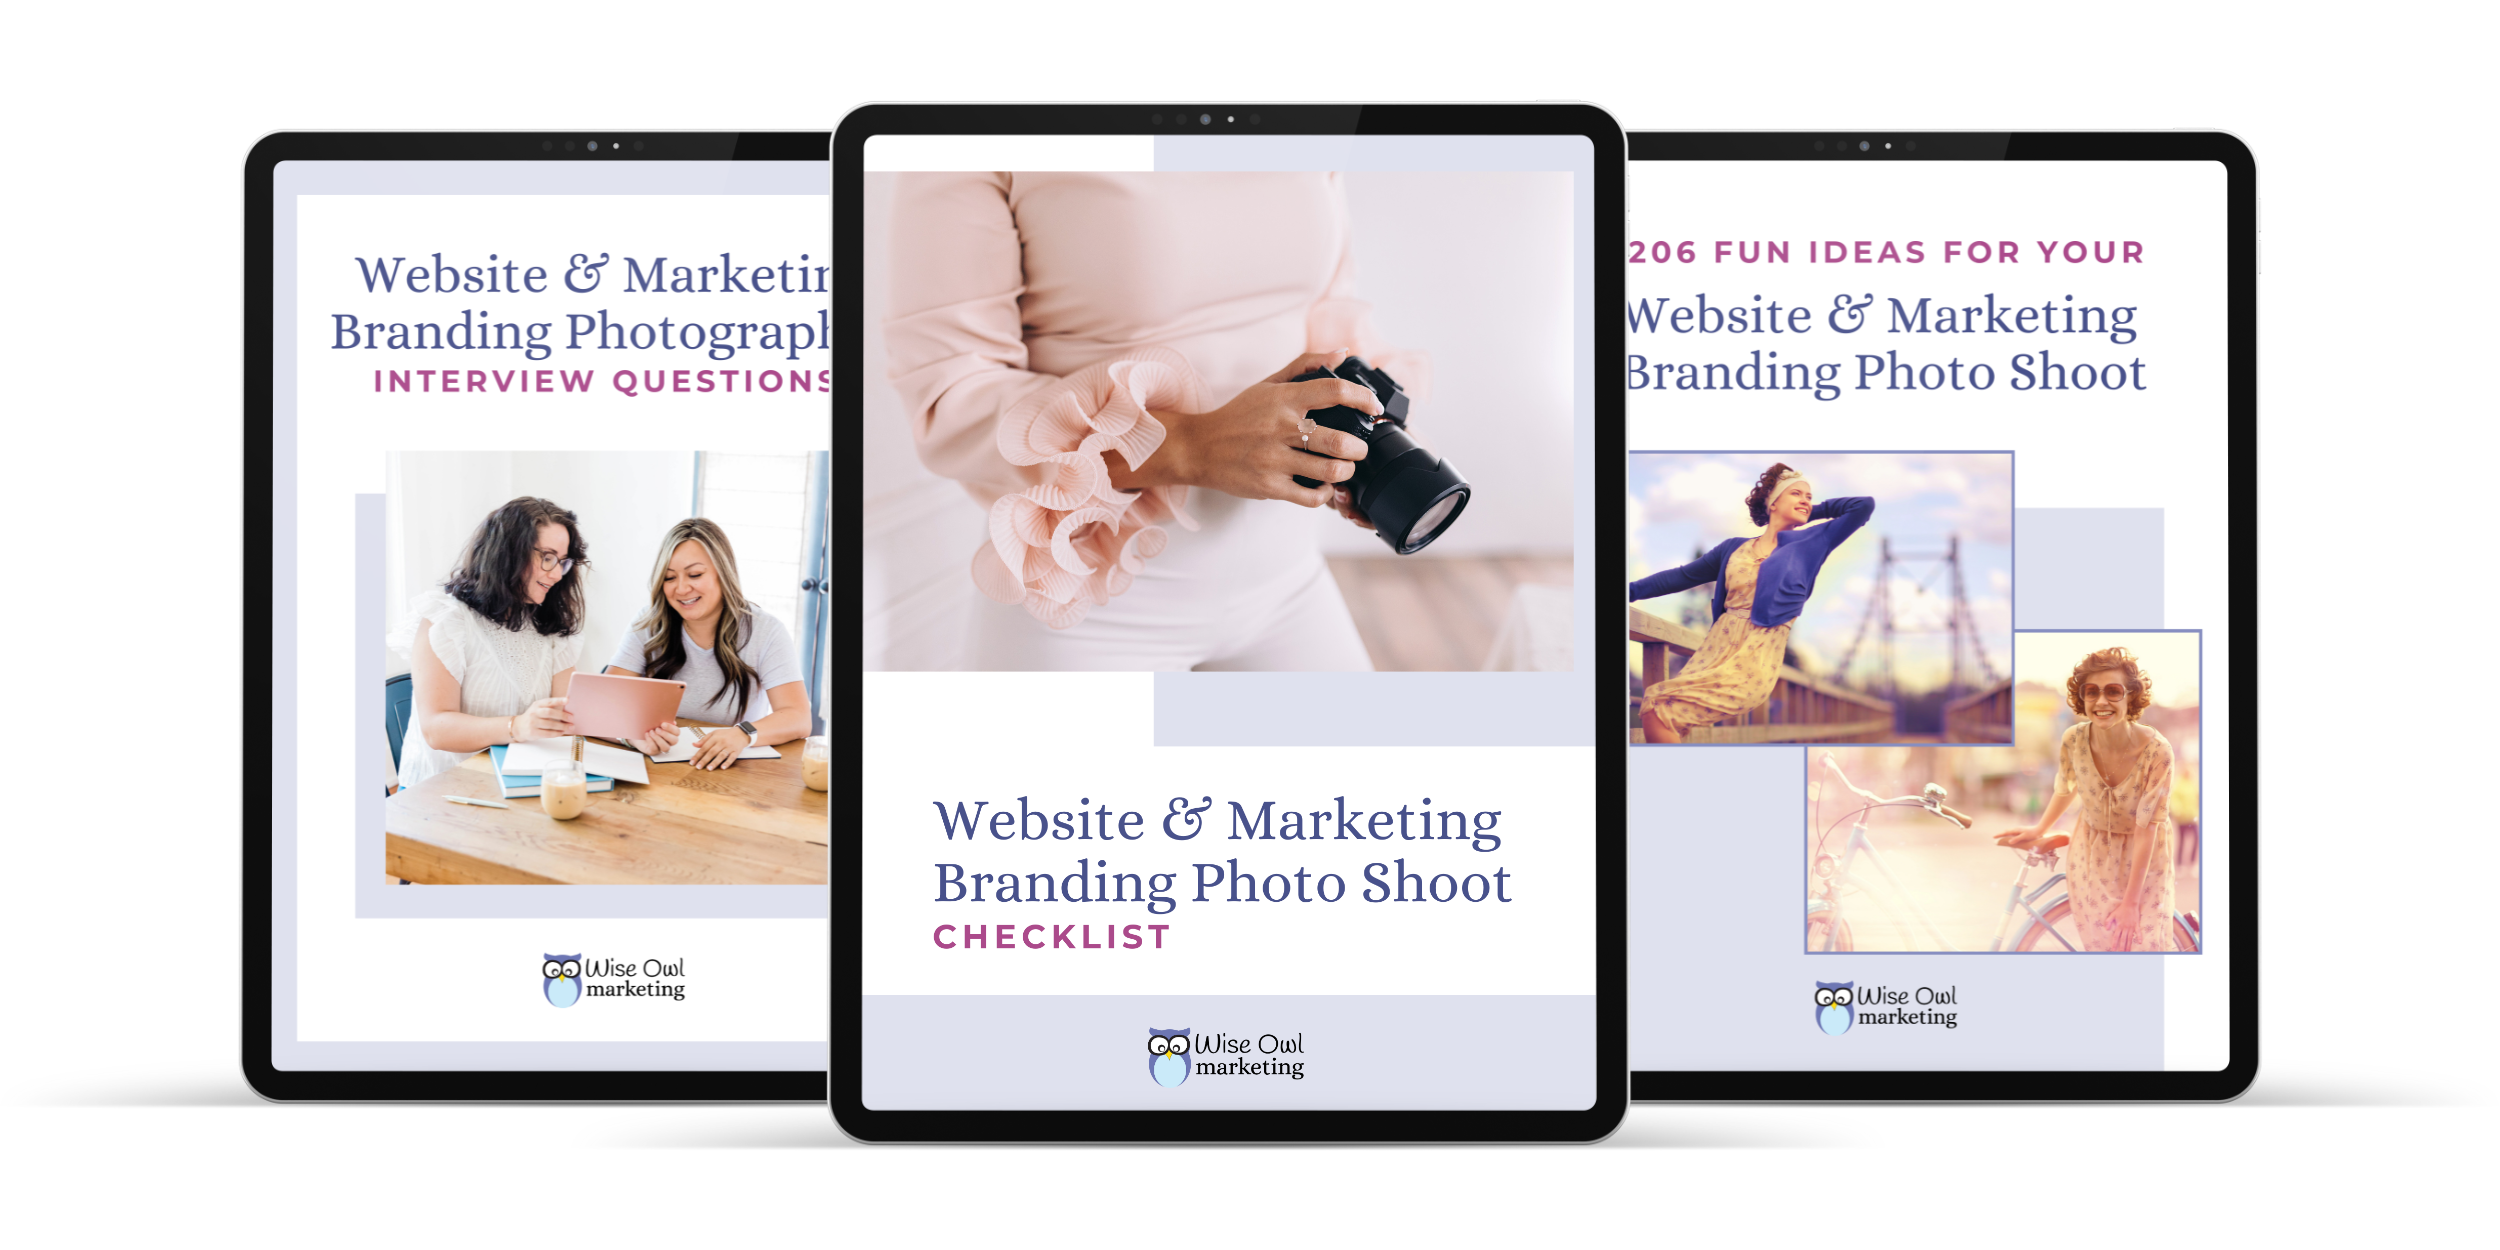 mockup of 3 ipads showing the covers of the photo shoot checklist, interview questions, and photo shoot ideas workbooks